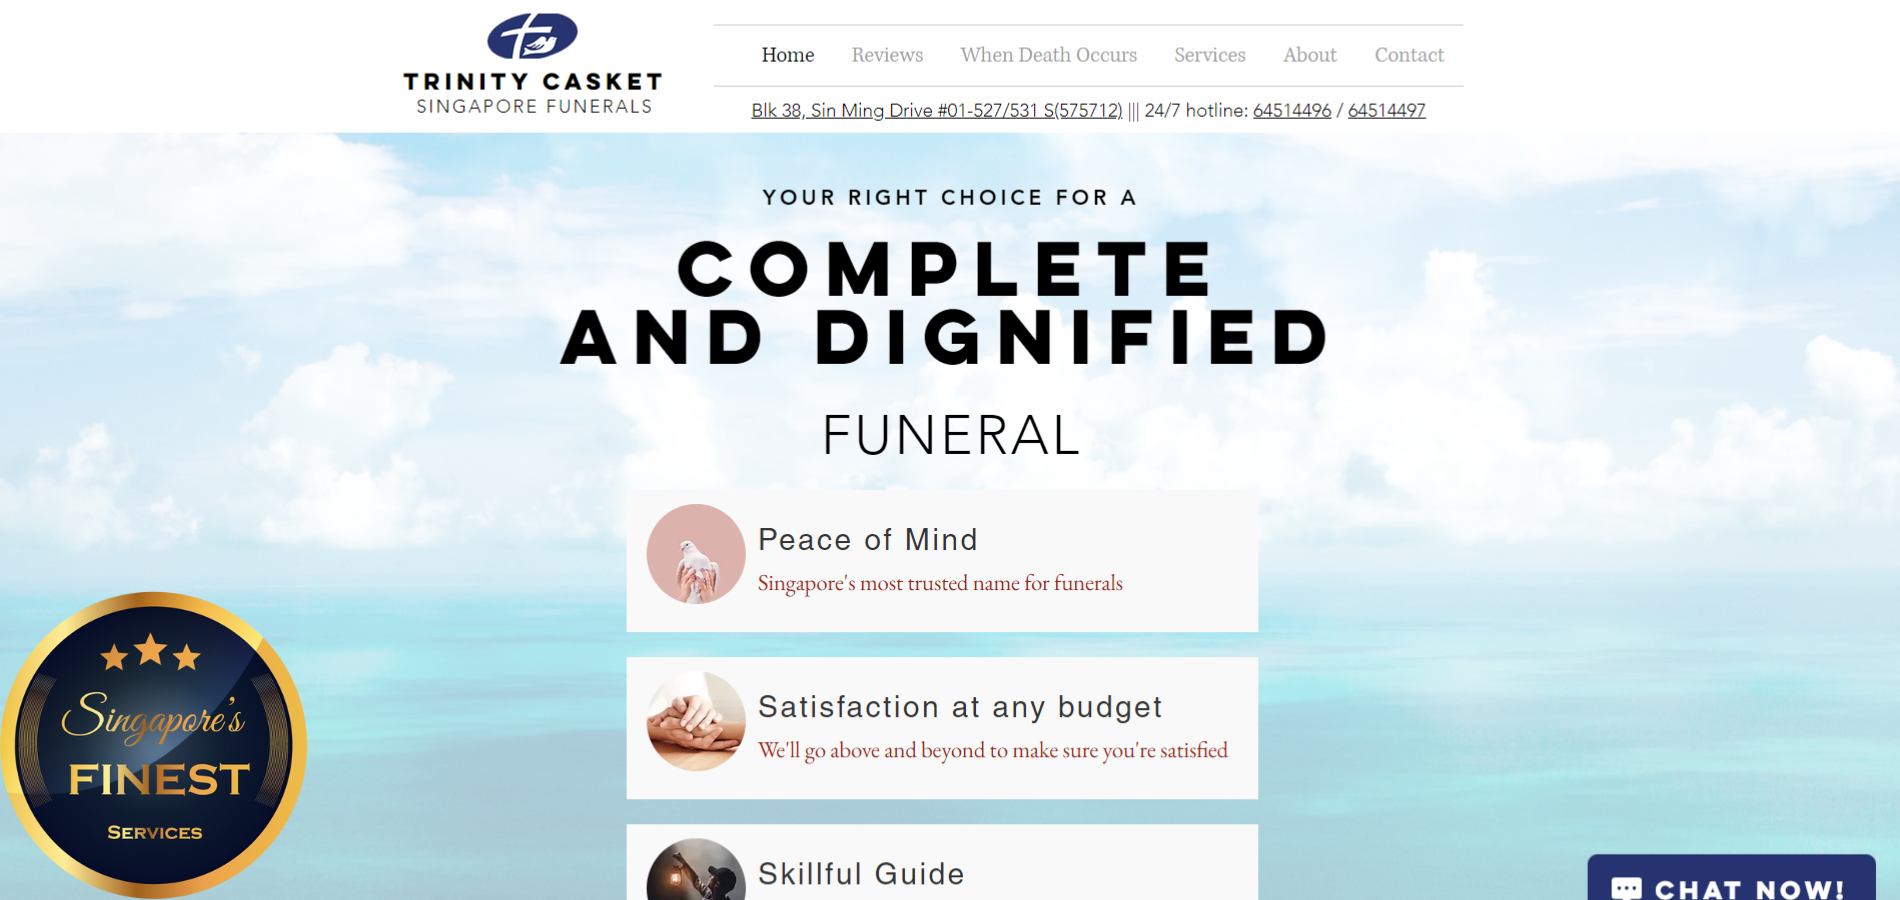 The Finest Funeral Services in Singapore